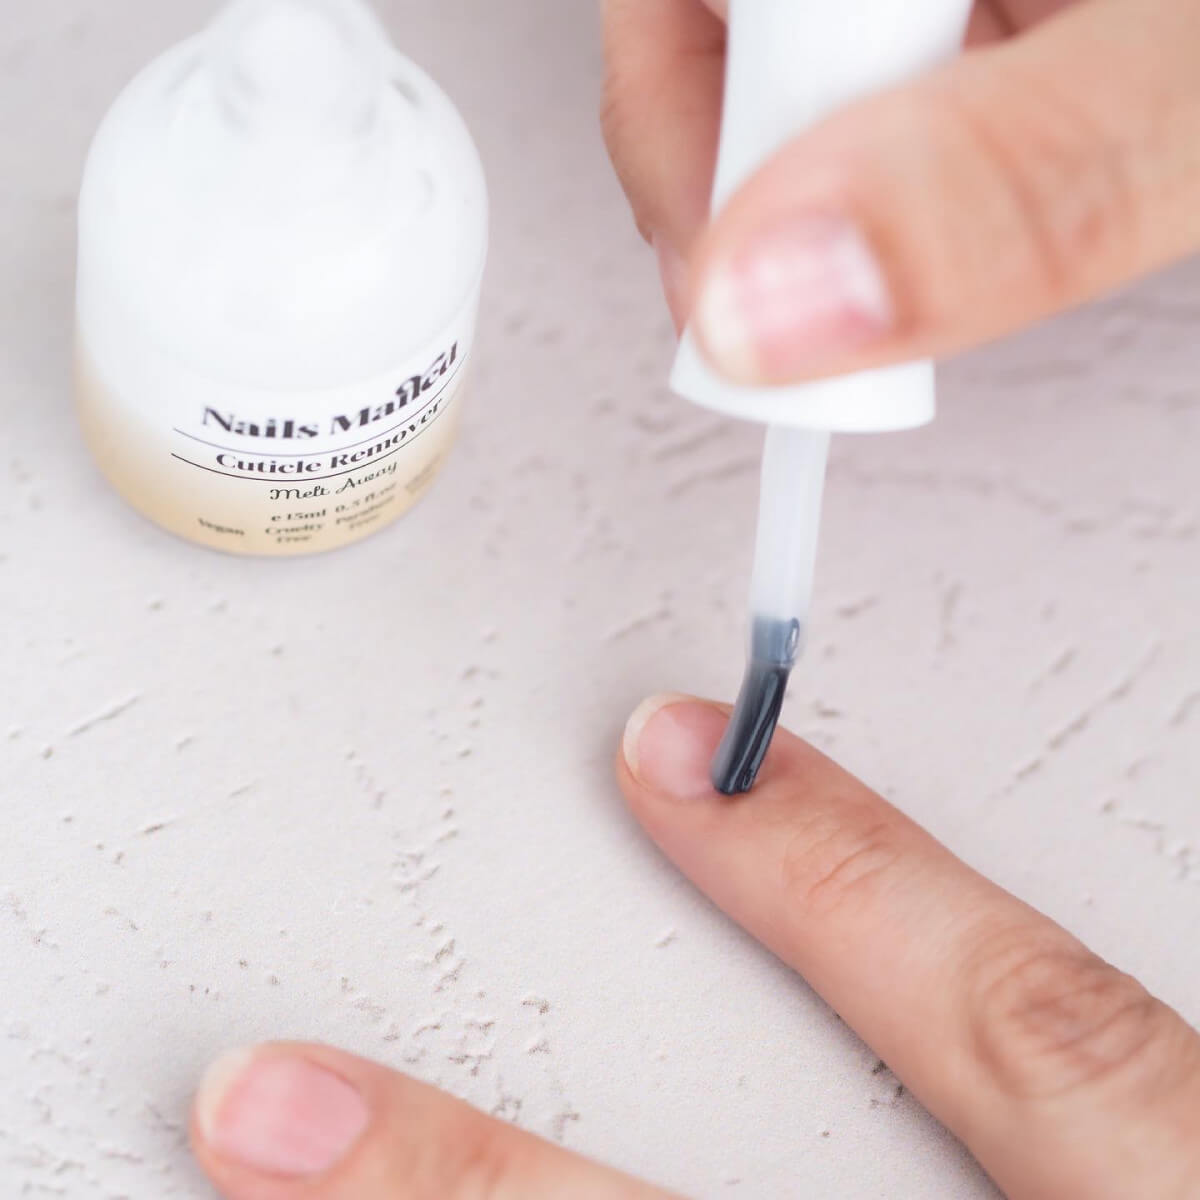 Cuticle Health Explained - A 3 Step Guide to Healthy Nails